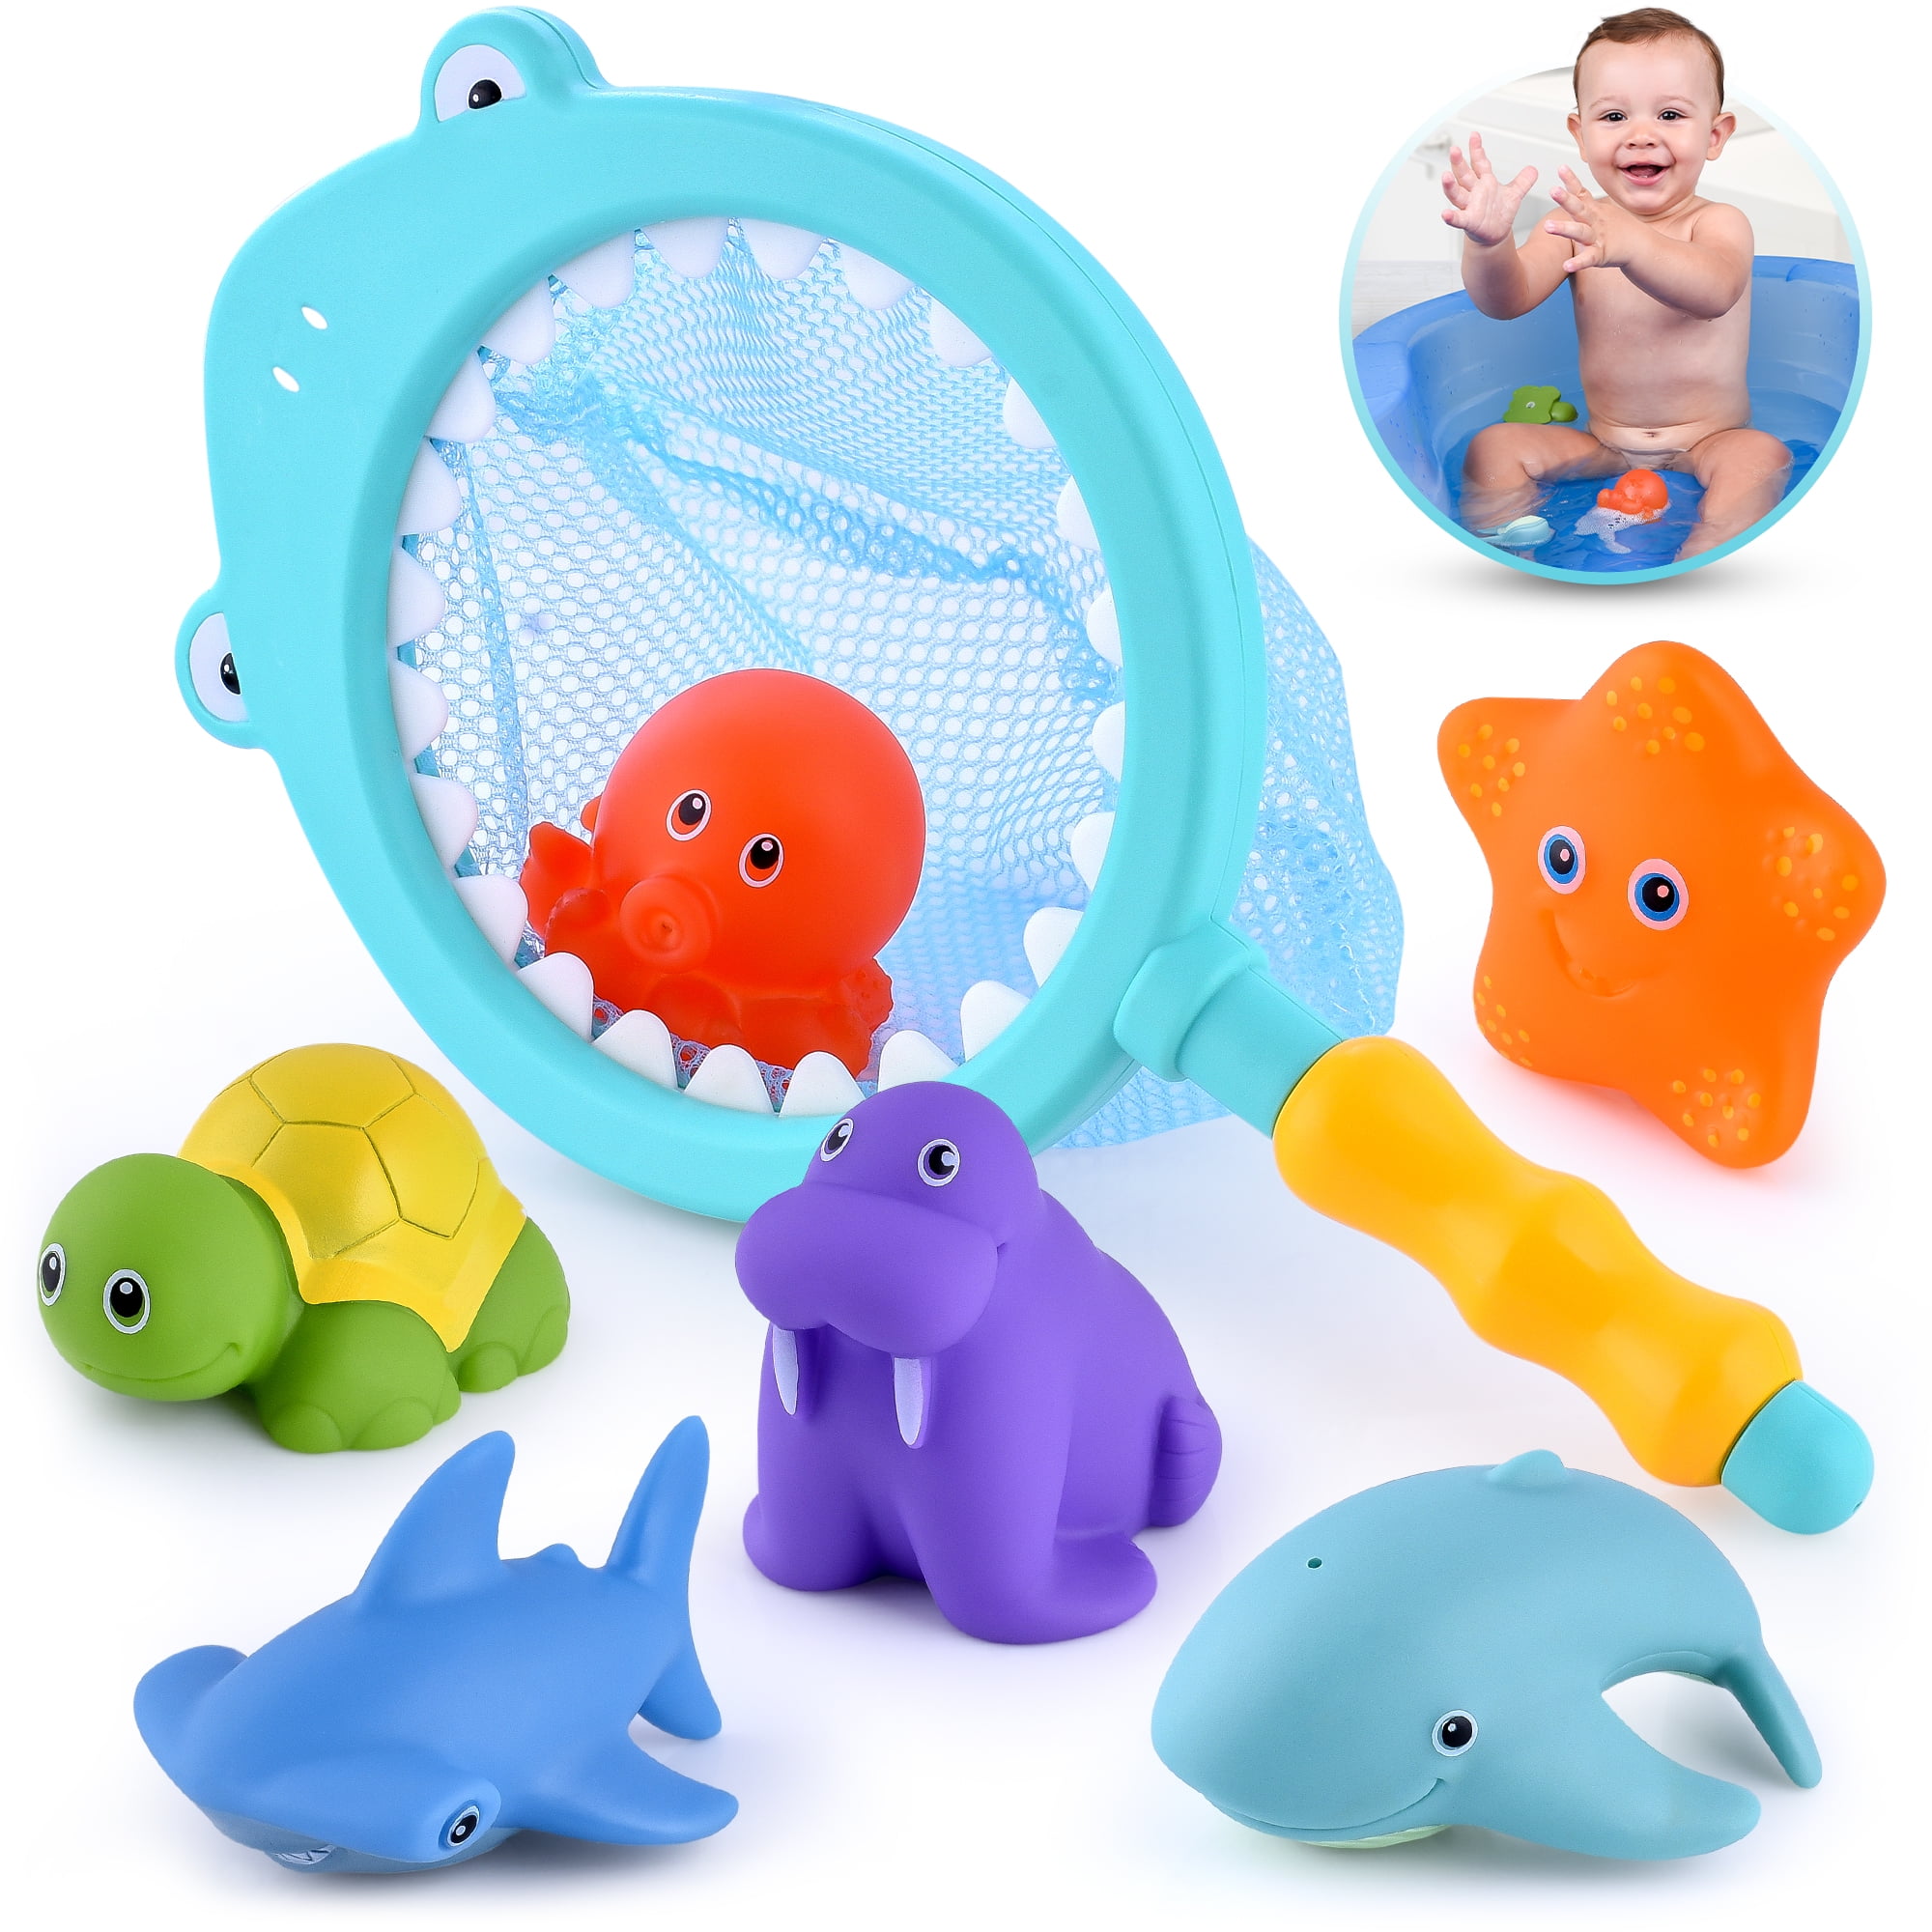 Pack Of 6 Rubber Ducks With Net Bath Time Fun Toys Plays Fishing Toy Random 